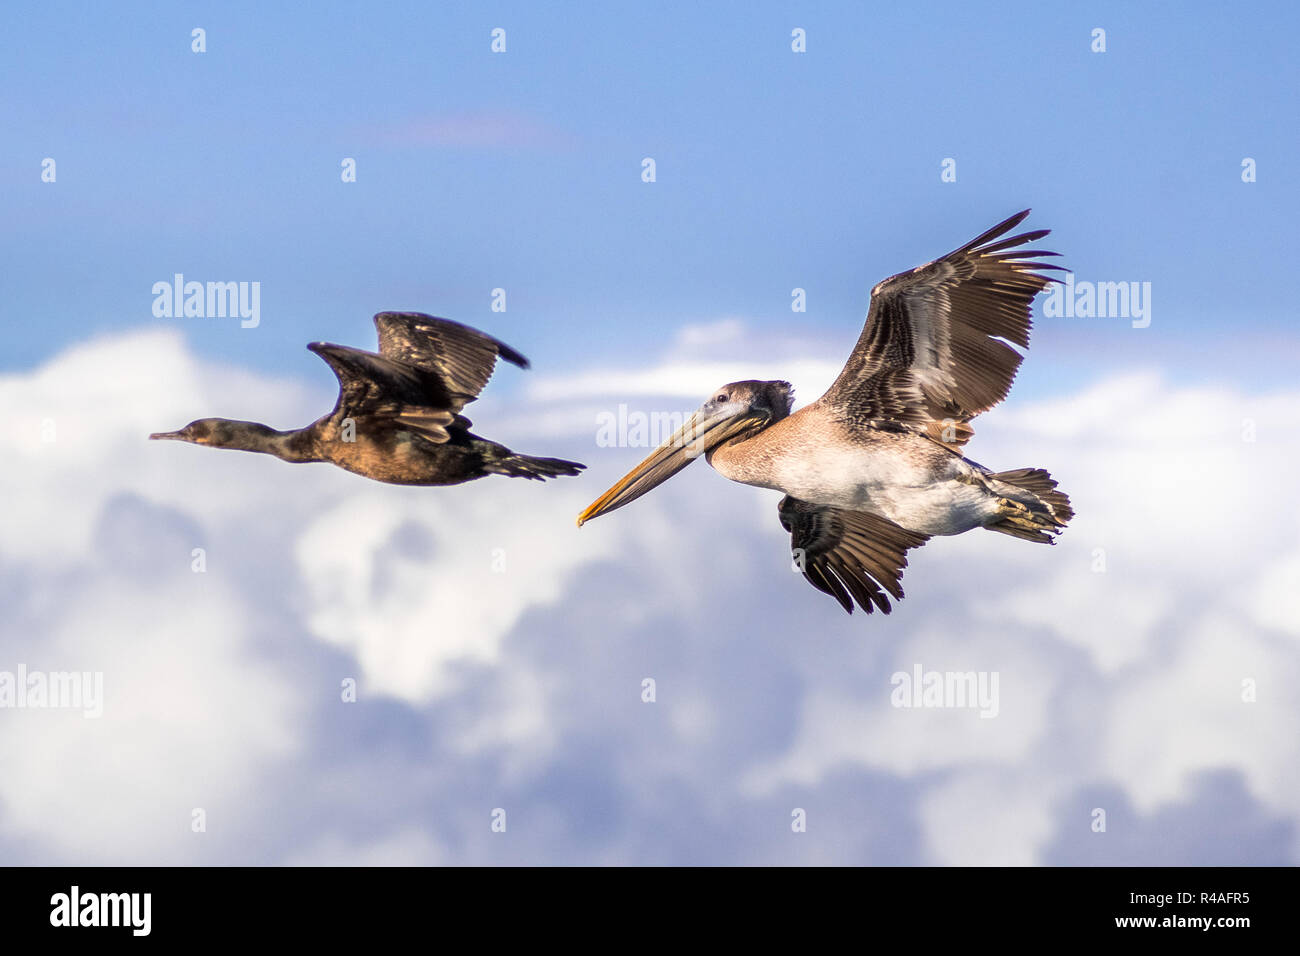 Brown pelican and cormorant flying; white clouds and blue sky background Stock Photo